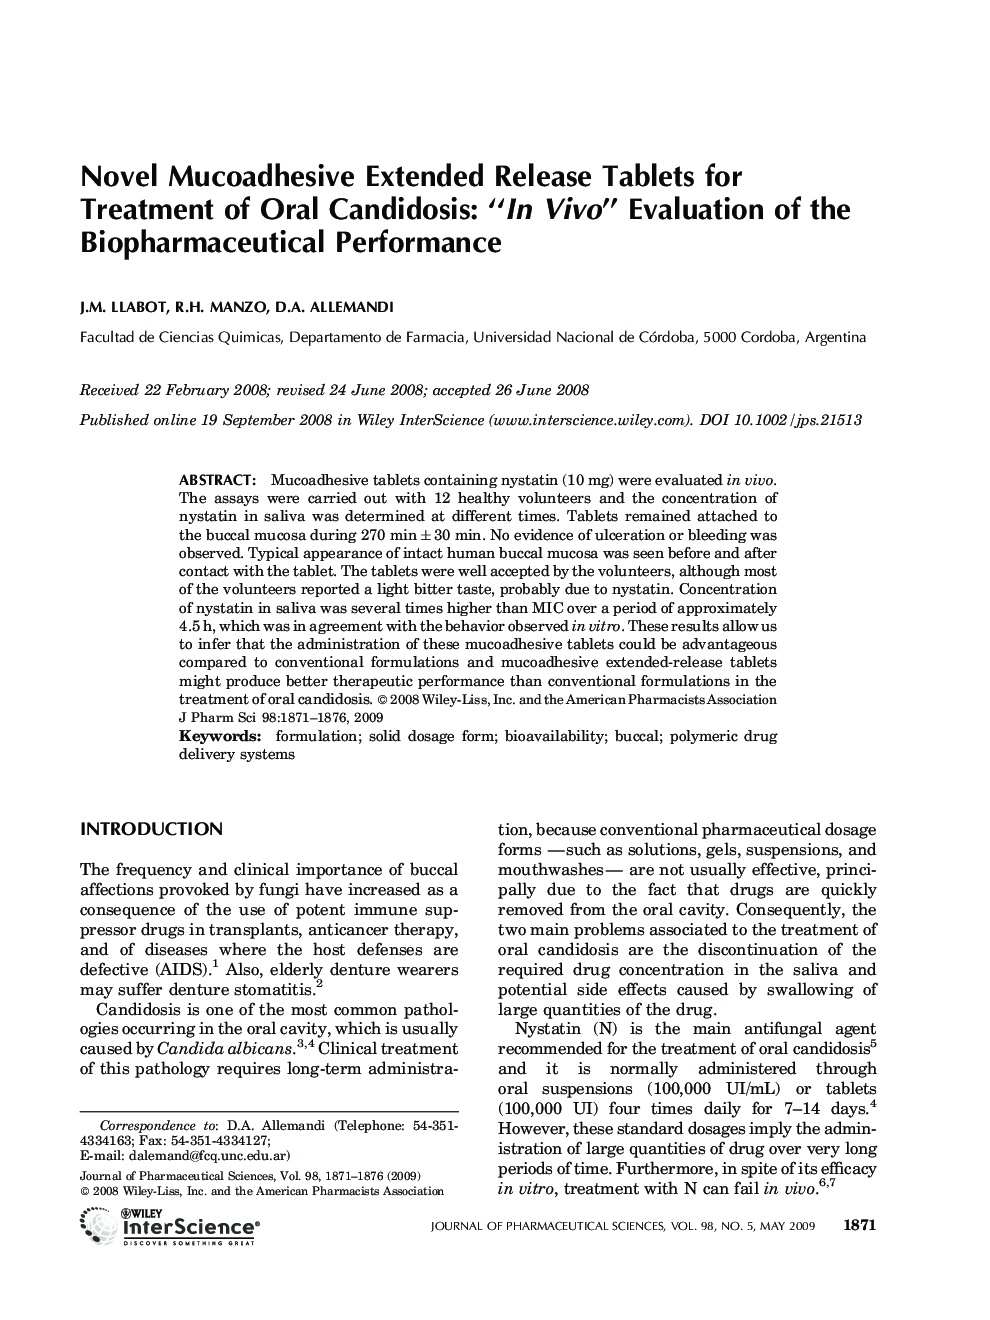 Novel Mucoadhesive Extended Release Tablets for Treatment of Oral Candidosis: “In Vivo” Evaluation of the Biopharmaceutical Performance